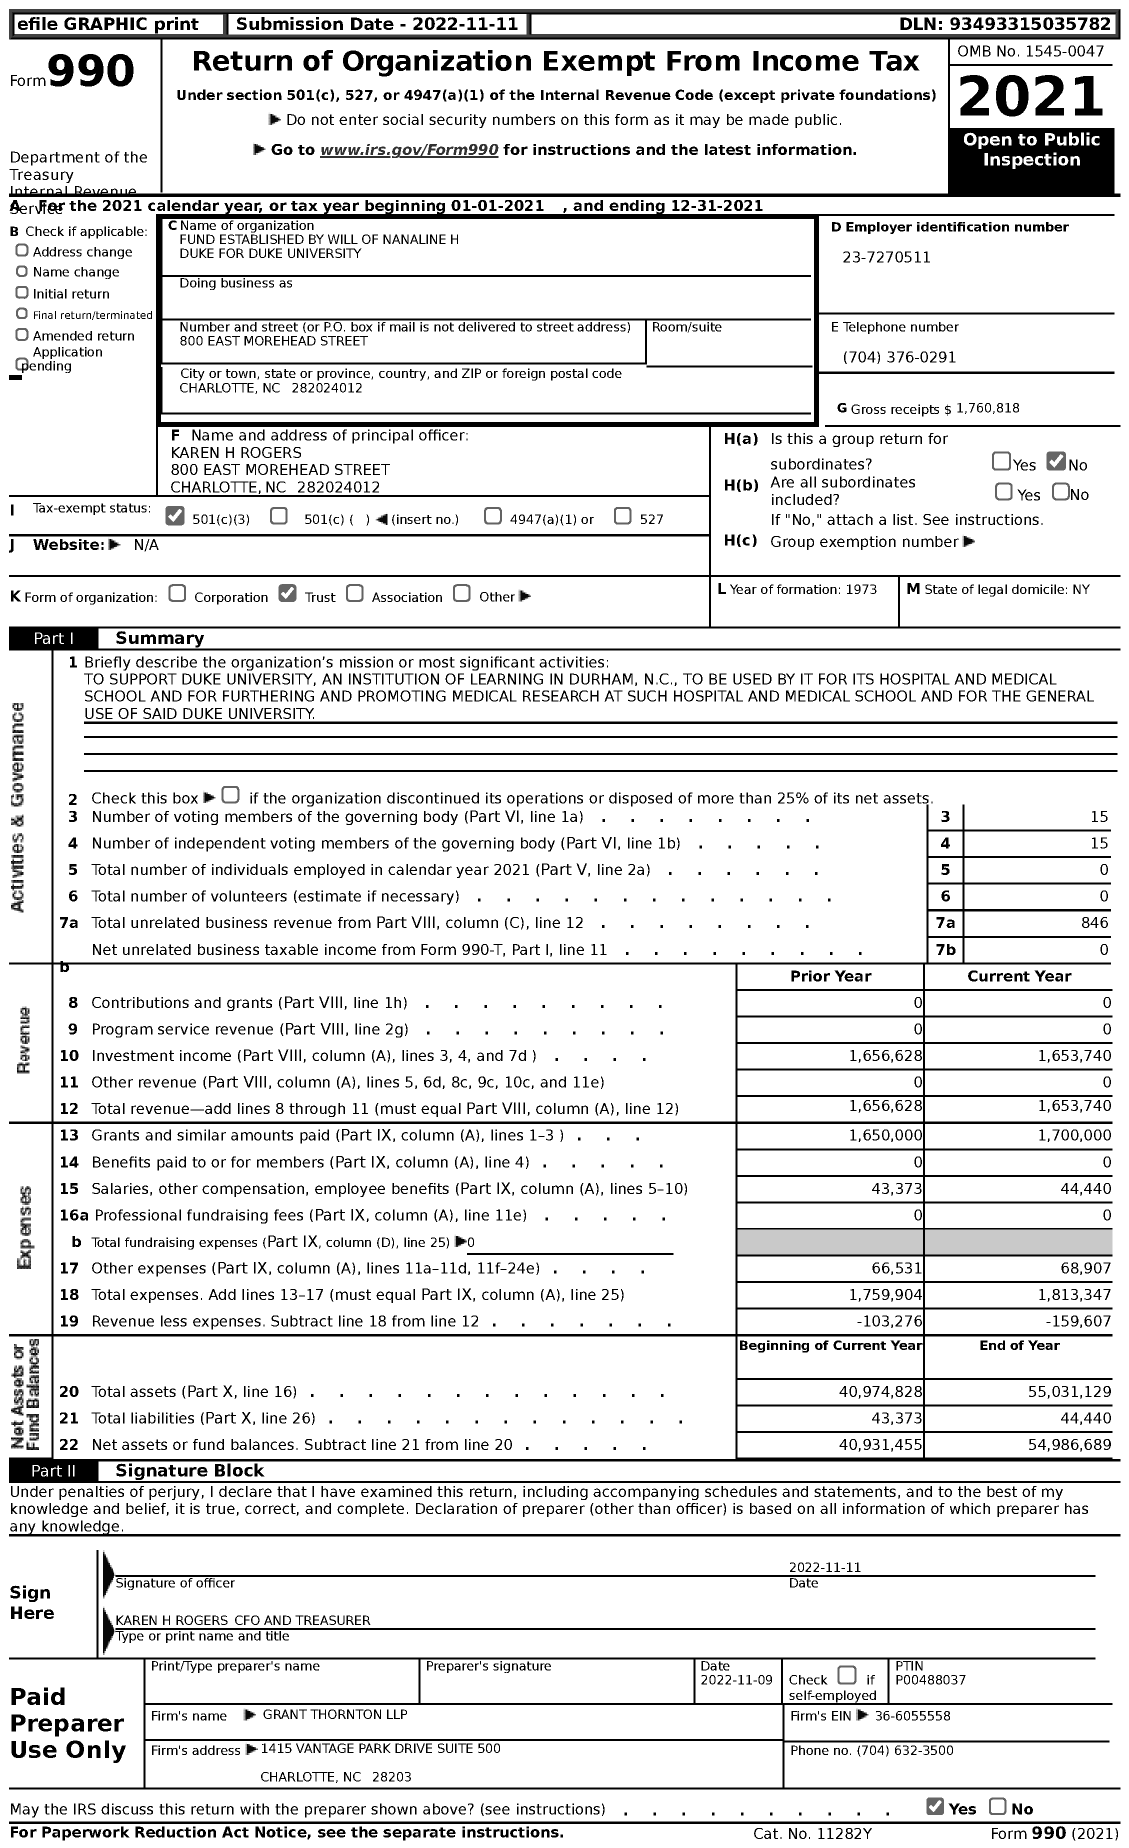 Image of first page of 2021 Form 990 for Fund Established By Will of Nanaline H Duke For Duke University